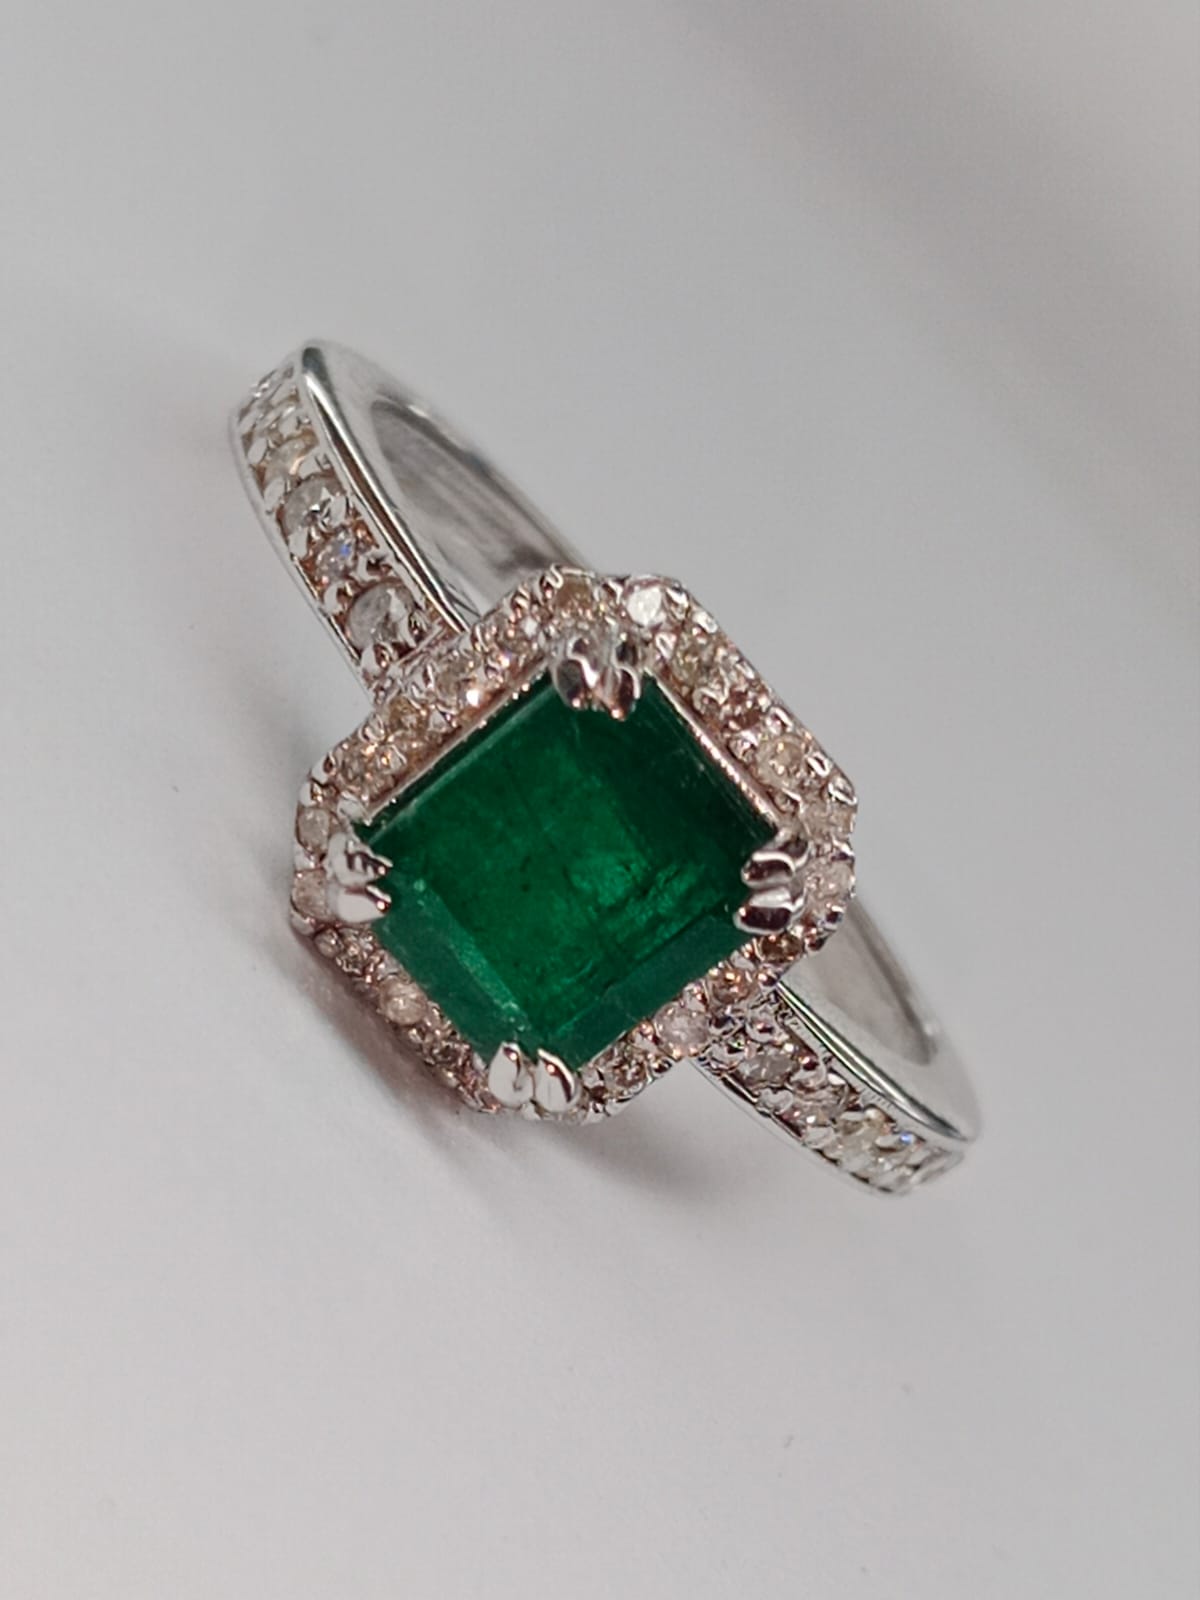 Beautiful Natural Emerald With Natural Diamonds & 18kGold - Image 3 of 6